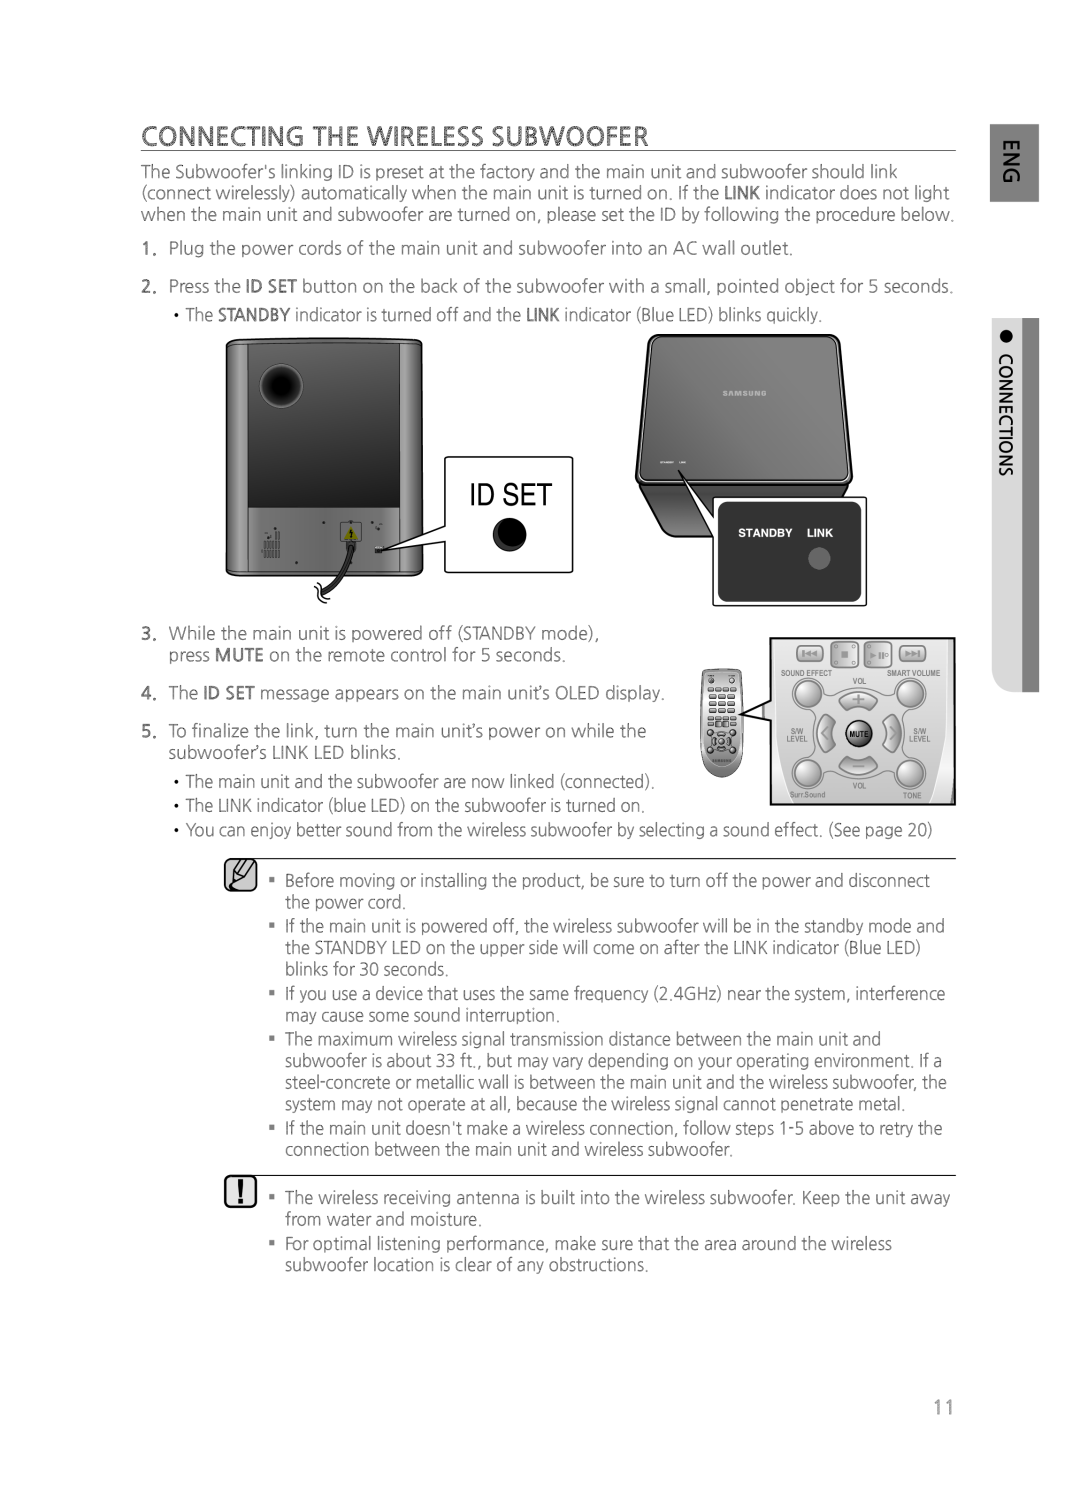 Samsung HW-H551/ZA, HWH550, HWH551, HW-H550/ZA user manual Connecting The Wireless Subwoofer, Connections 